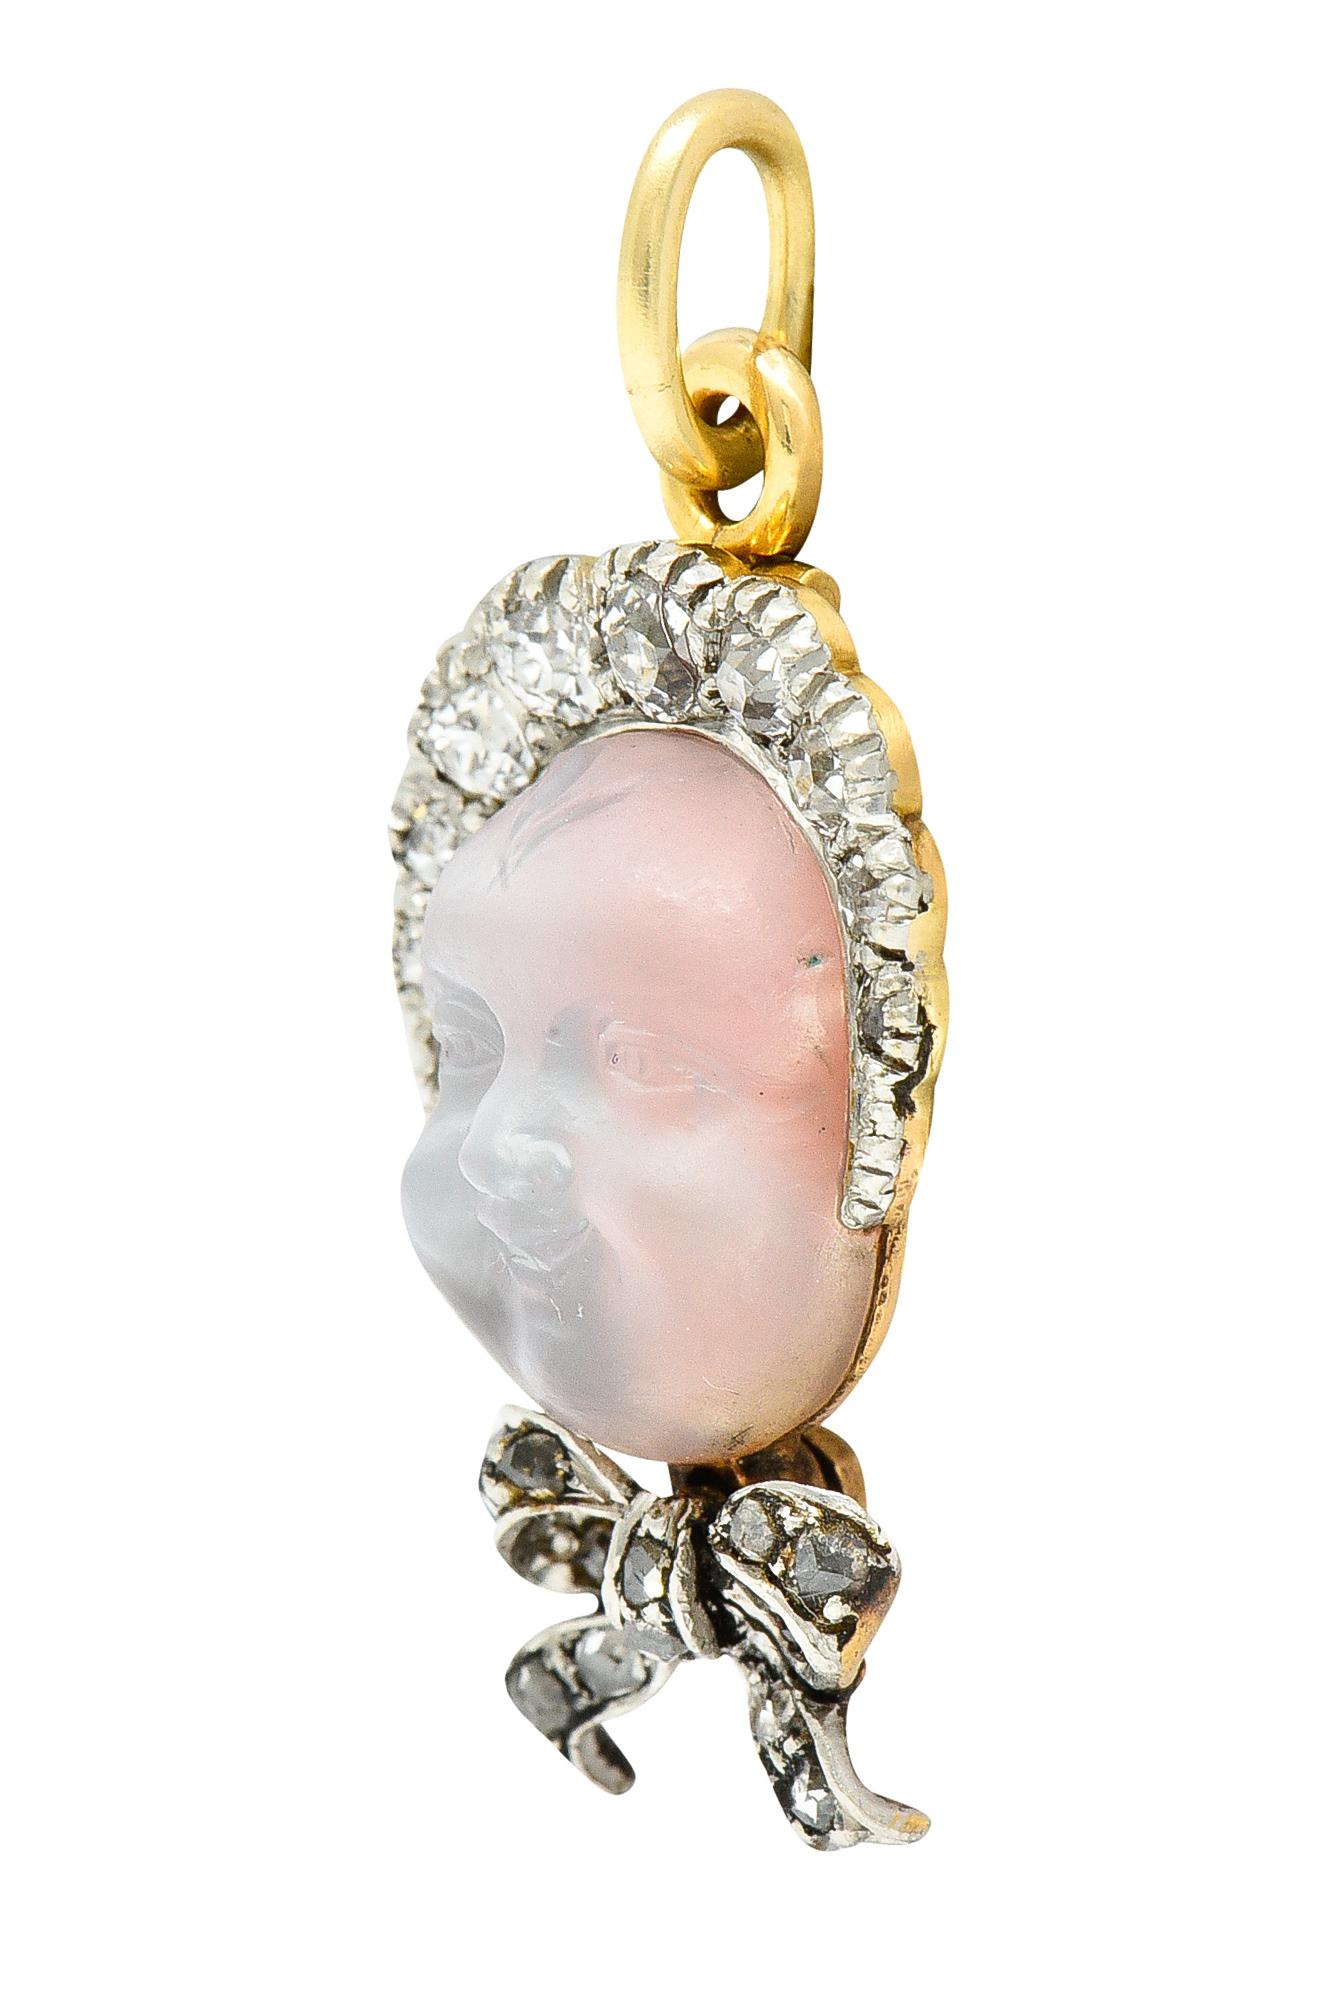 Featuring a carved moonstone cabochon measuring 8.0 x 11.0 mm depicting a baby face. Translucent colorless with white adularescence - wearing a platinum topped bonnet and bow. With old European and rose cut diamonds bead set throughout. Weighing